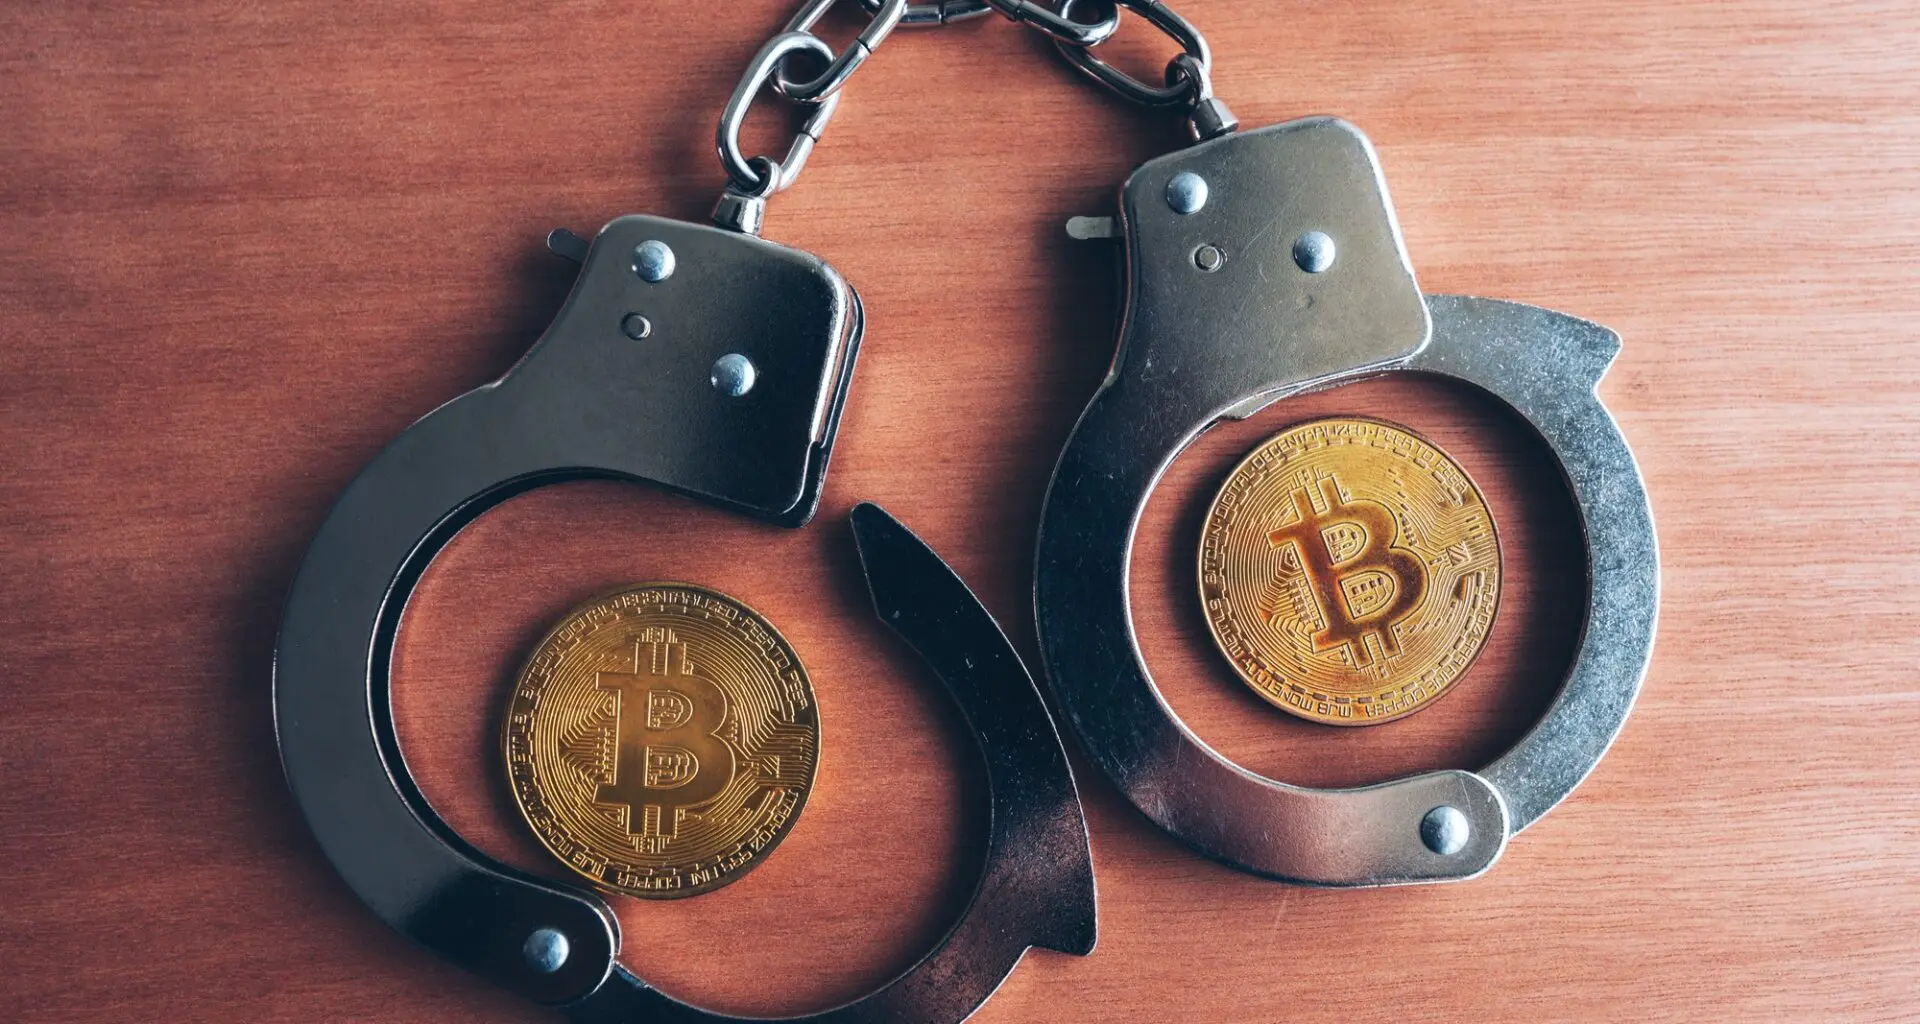 A conceptual image featuring a pair of handcuffs clasping a physical representation of a Bitcoin, suggesting a theme of legal enforcement or a potential SEC investigation into cryptocurrency activities.